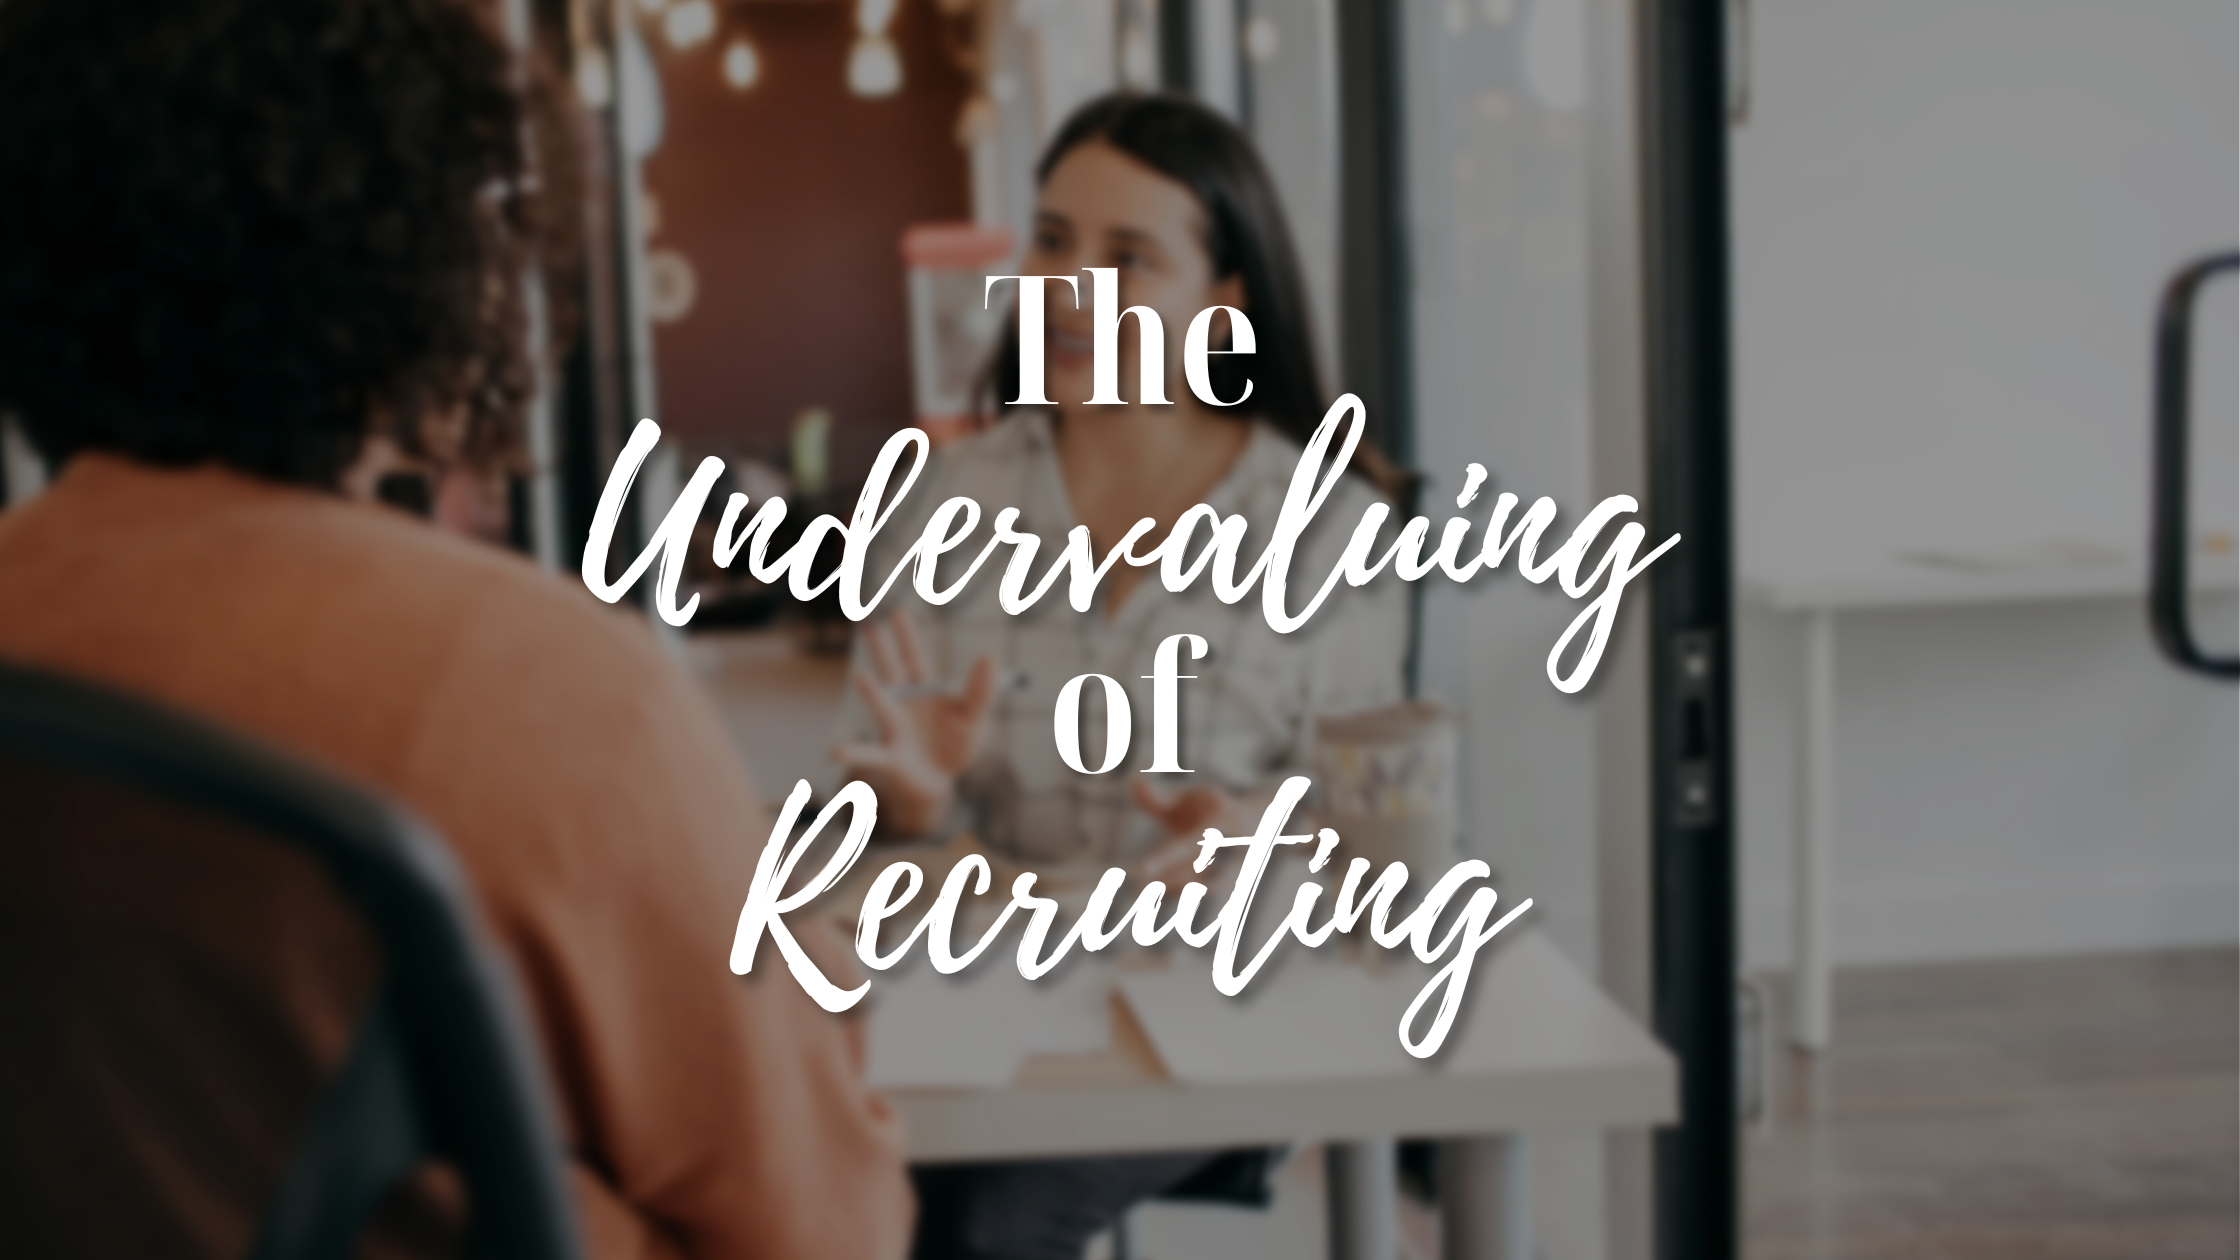 The Undervaluing of Recruiting